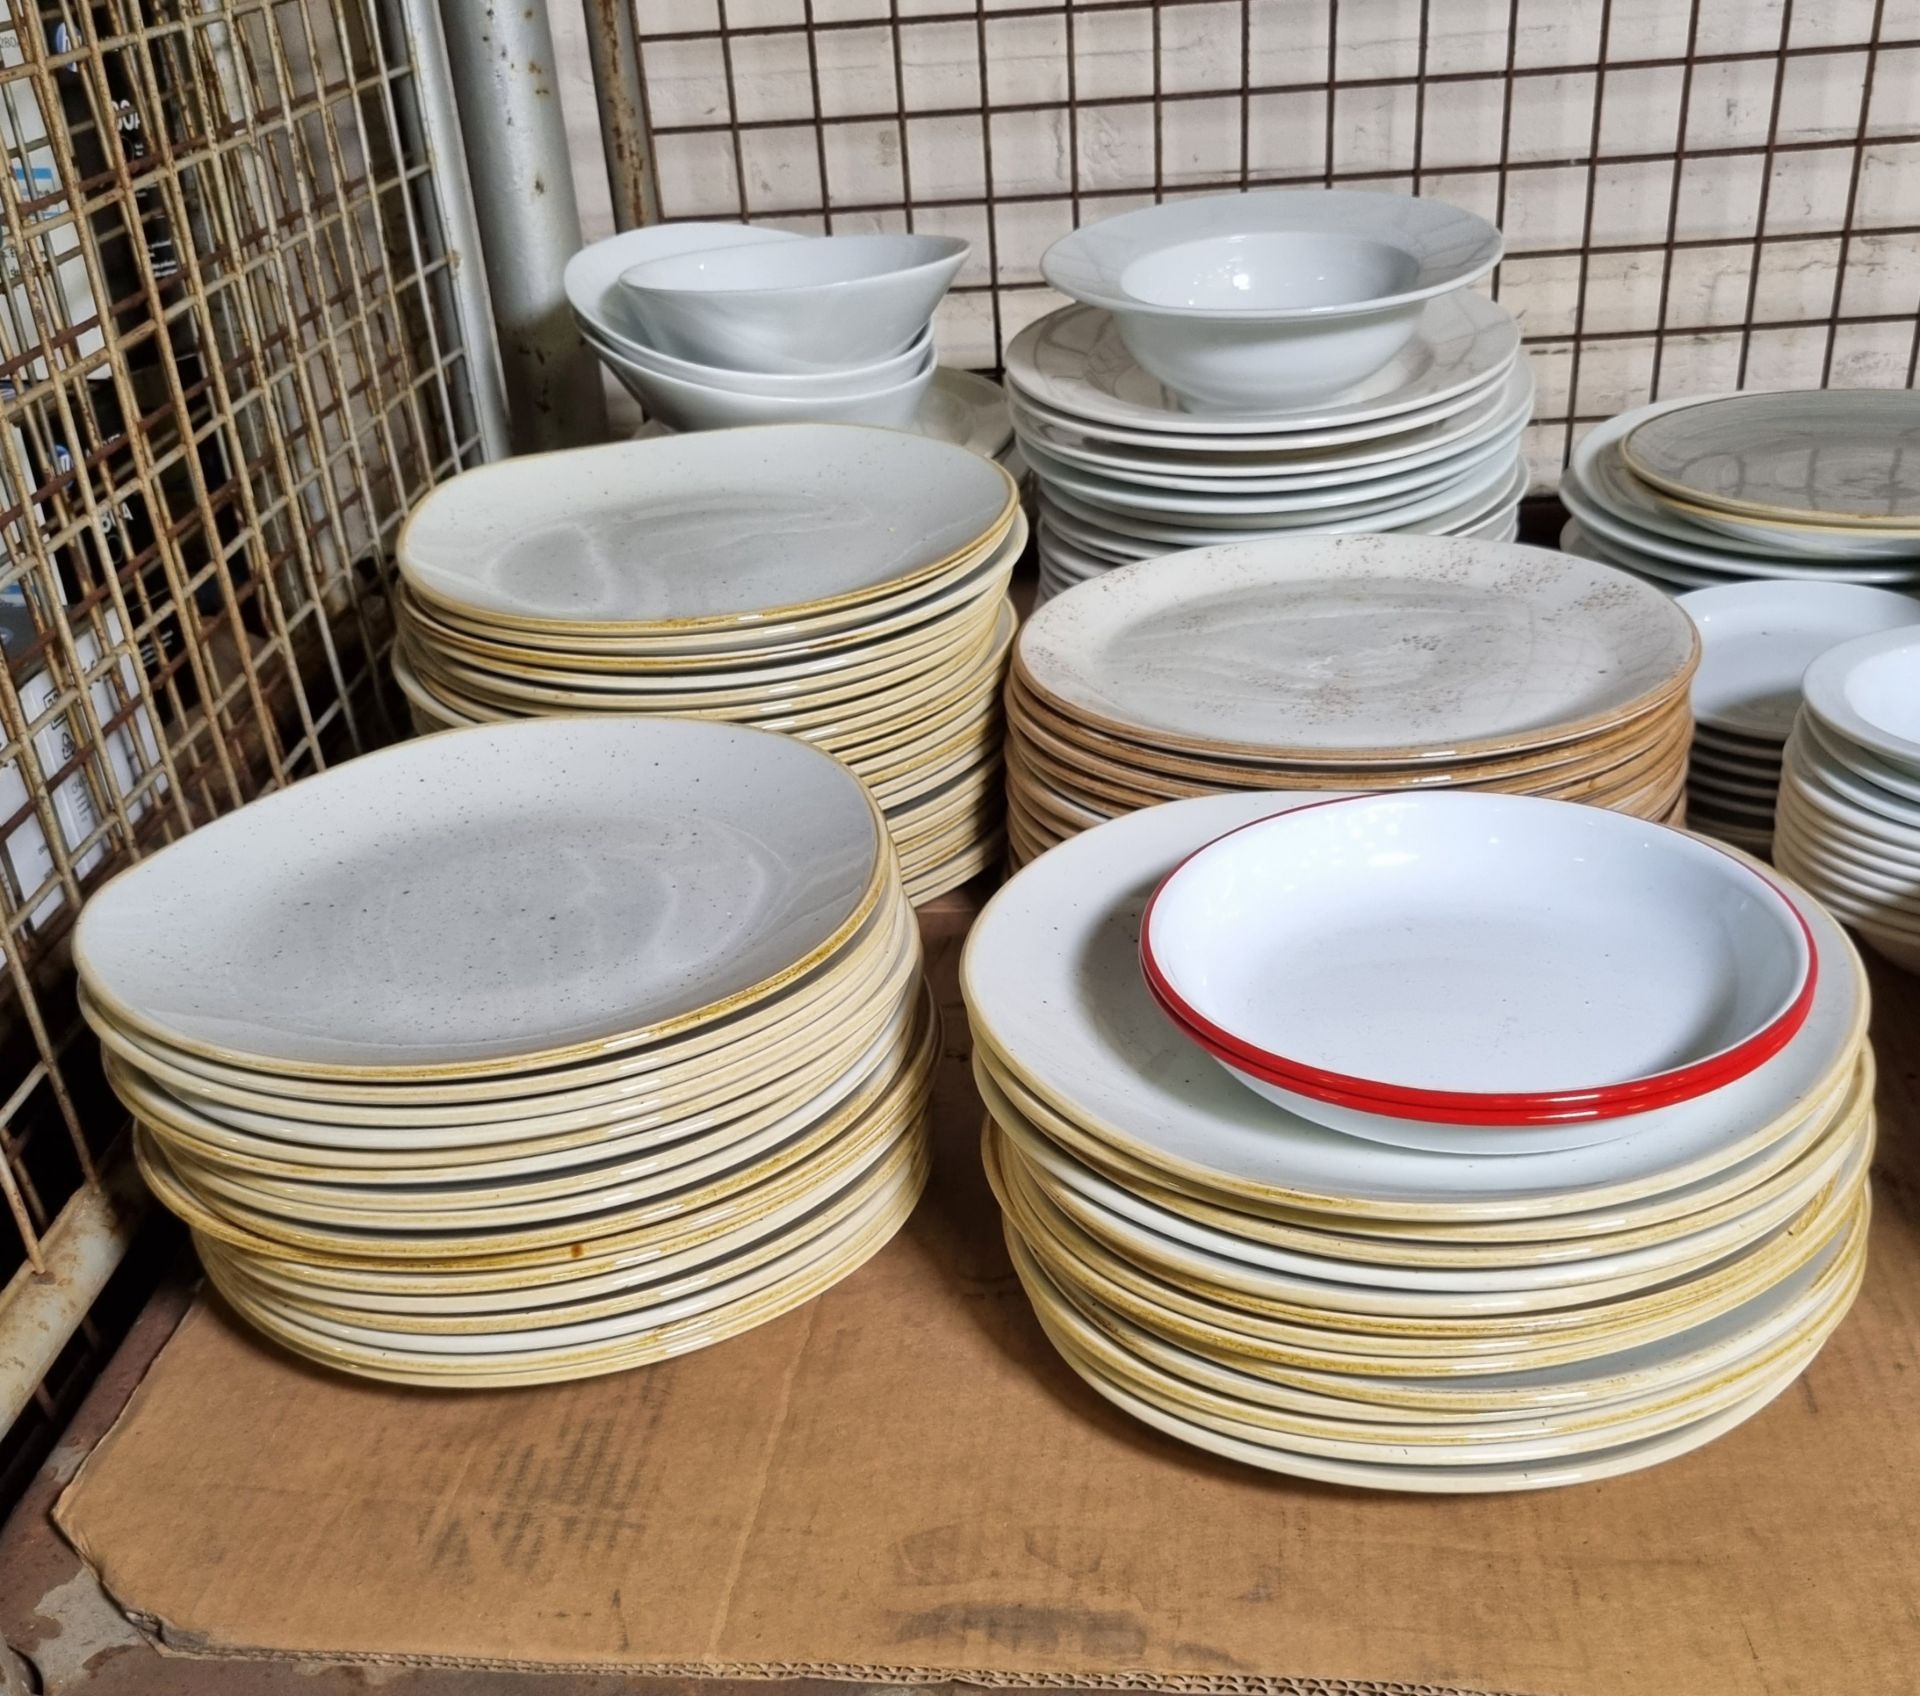 Tableware - Crockery plates & bowls assorted sizes and styles - Bild 4 aus 6